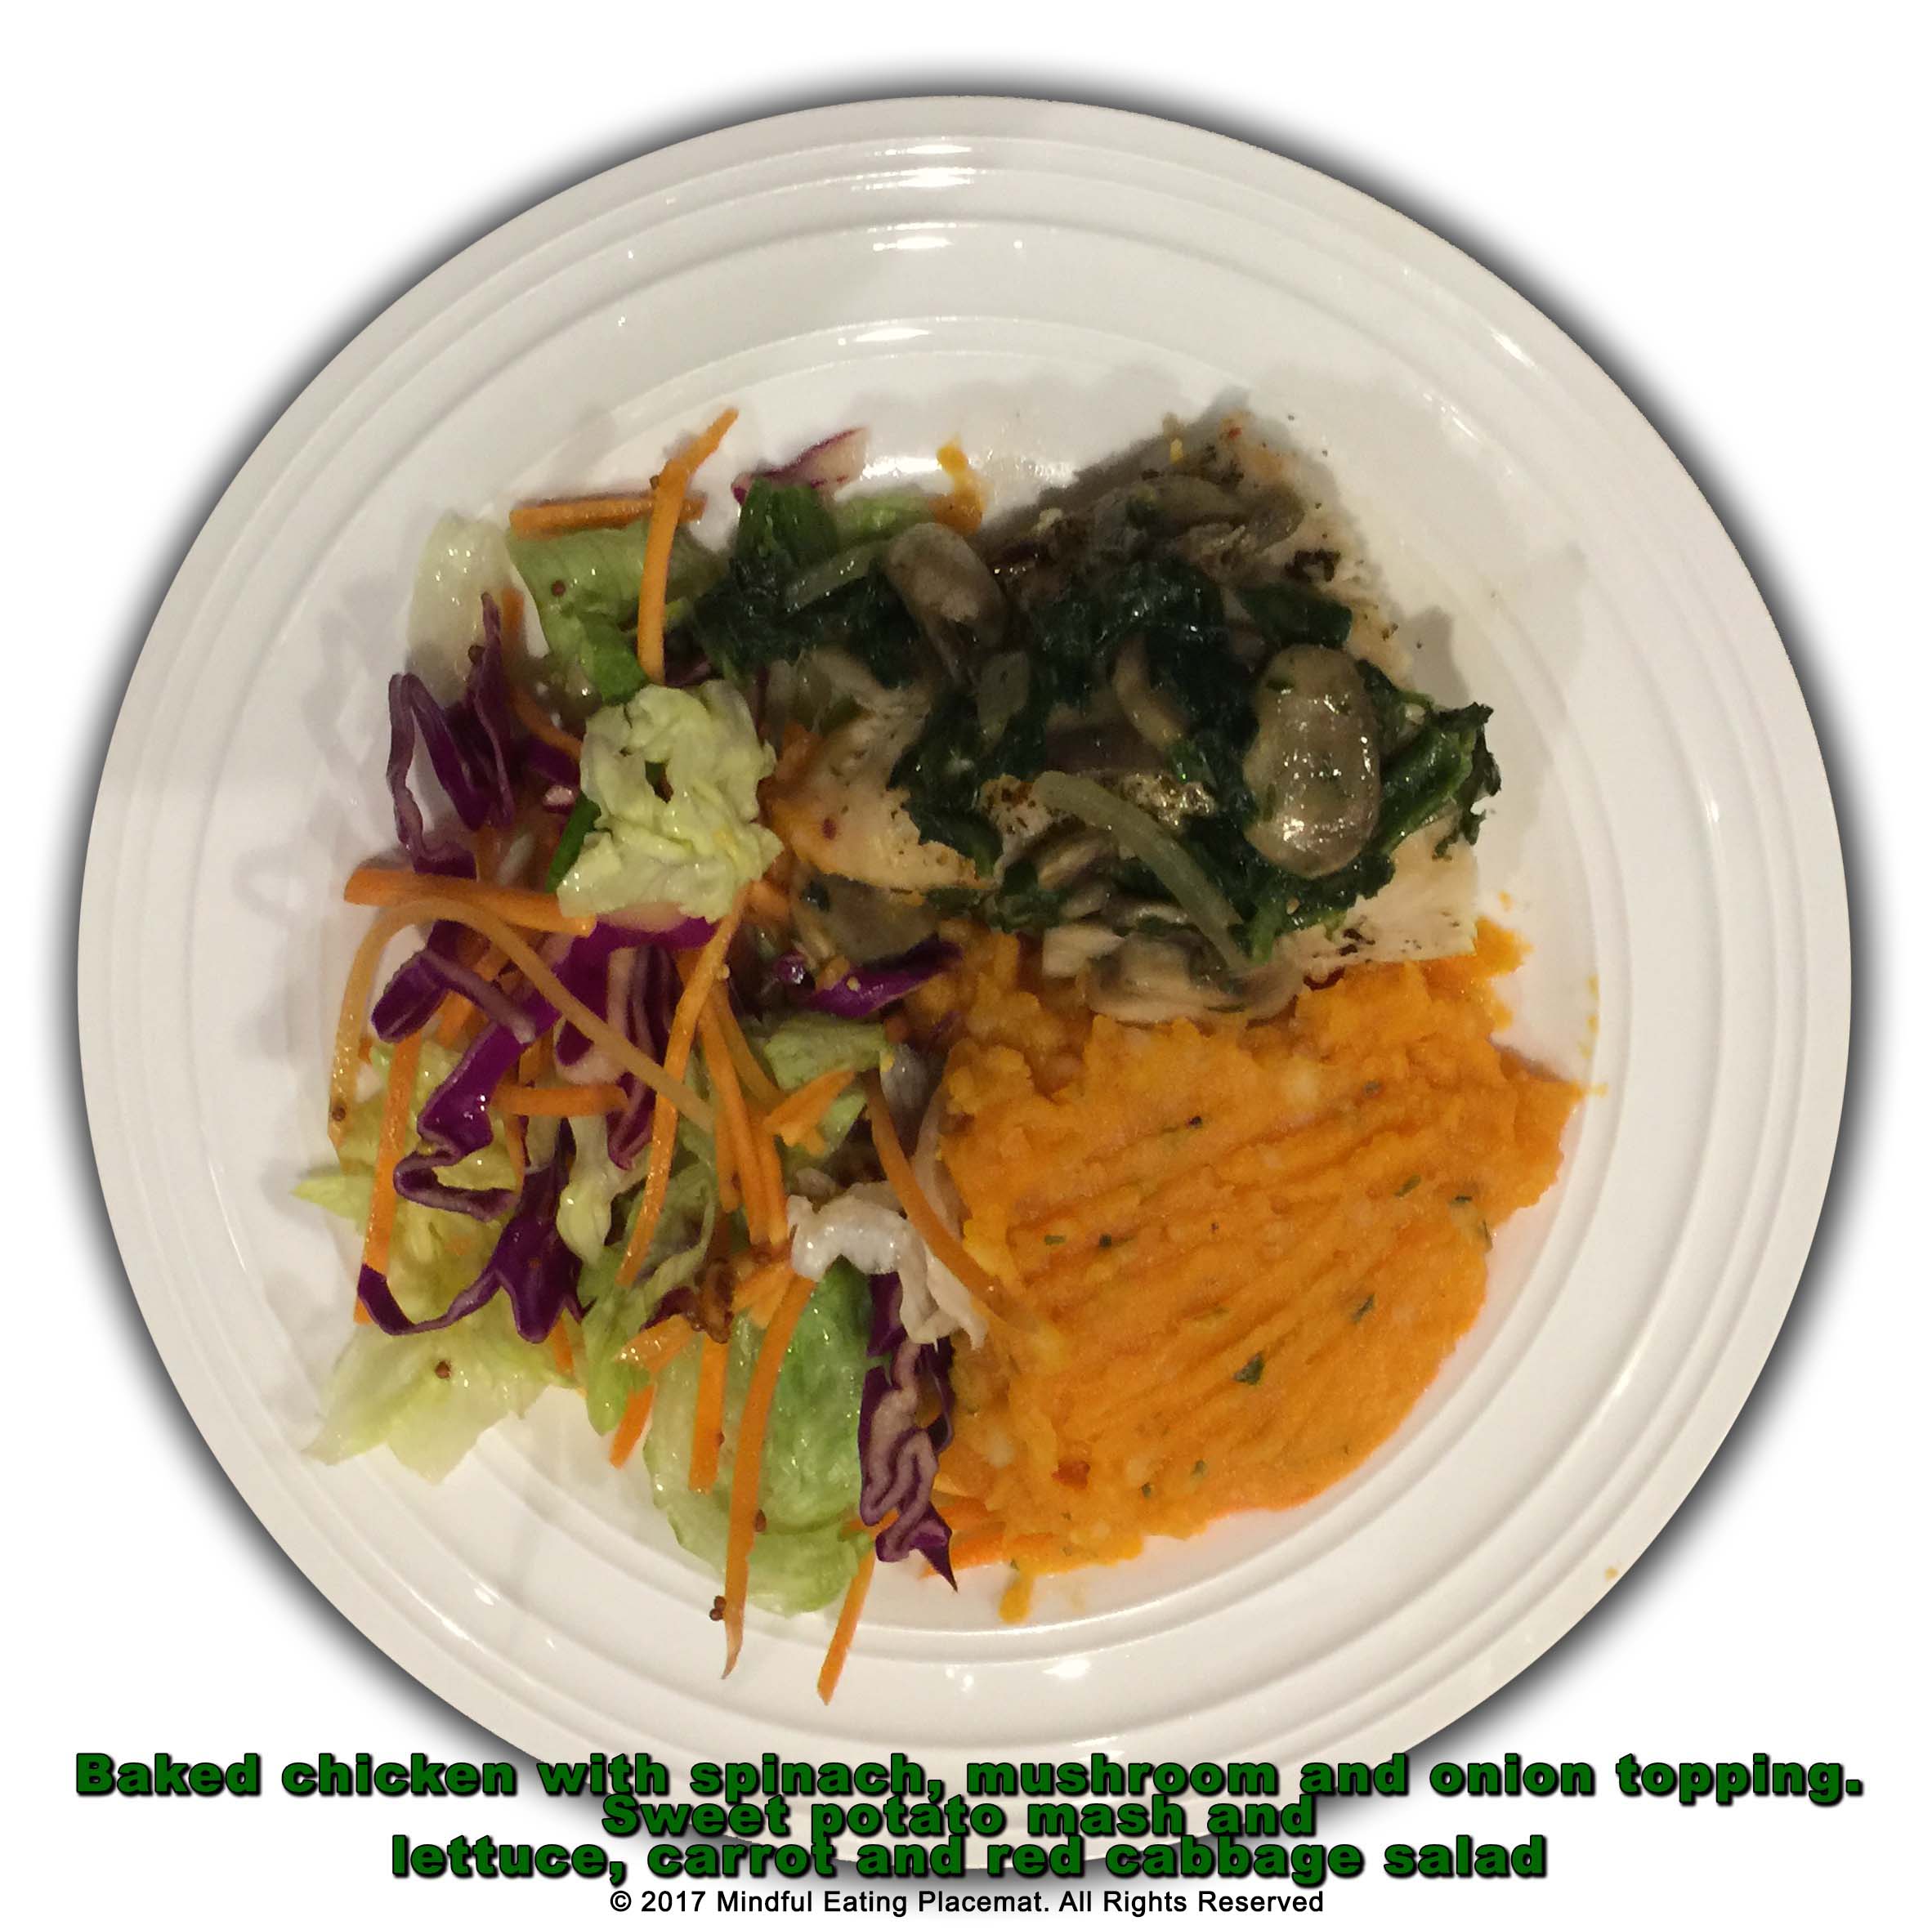 Baked chicken topped with mushrooms with sweet potato mash and side salad